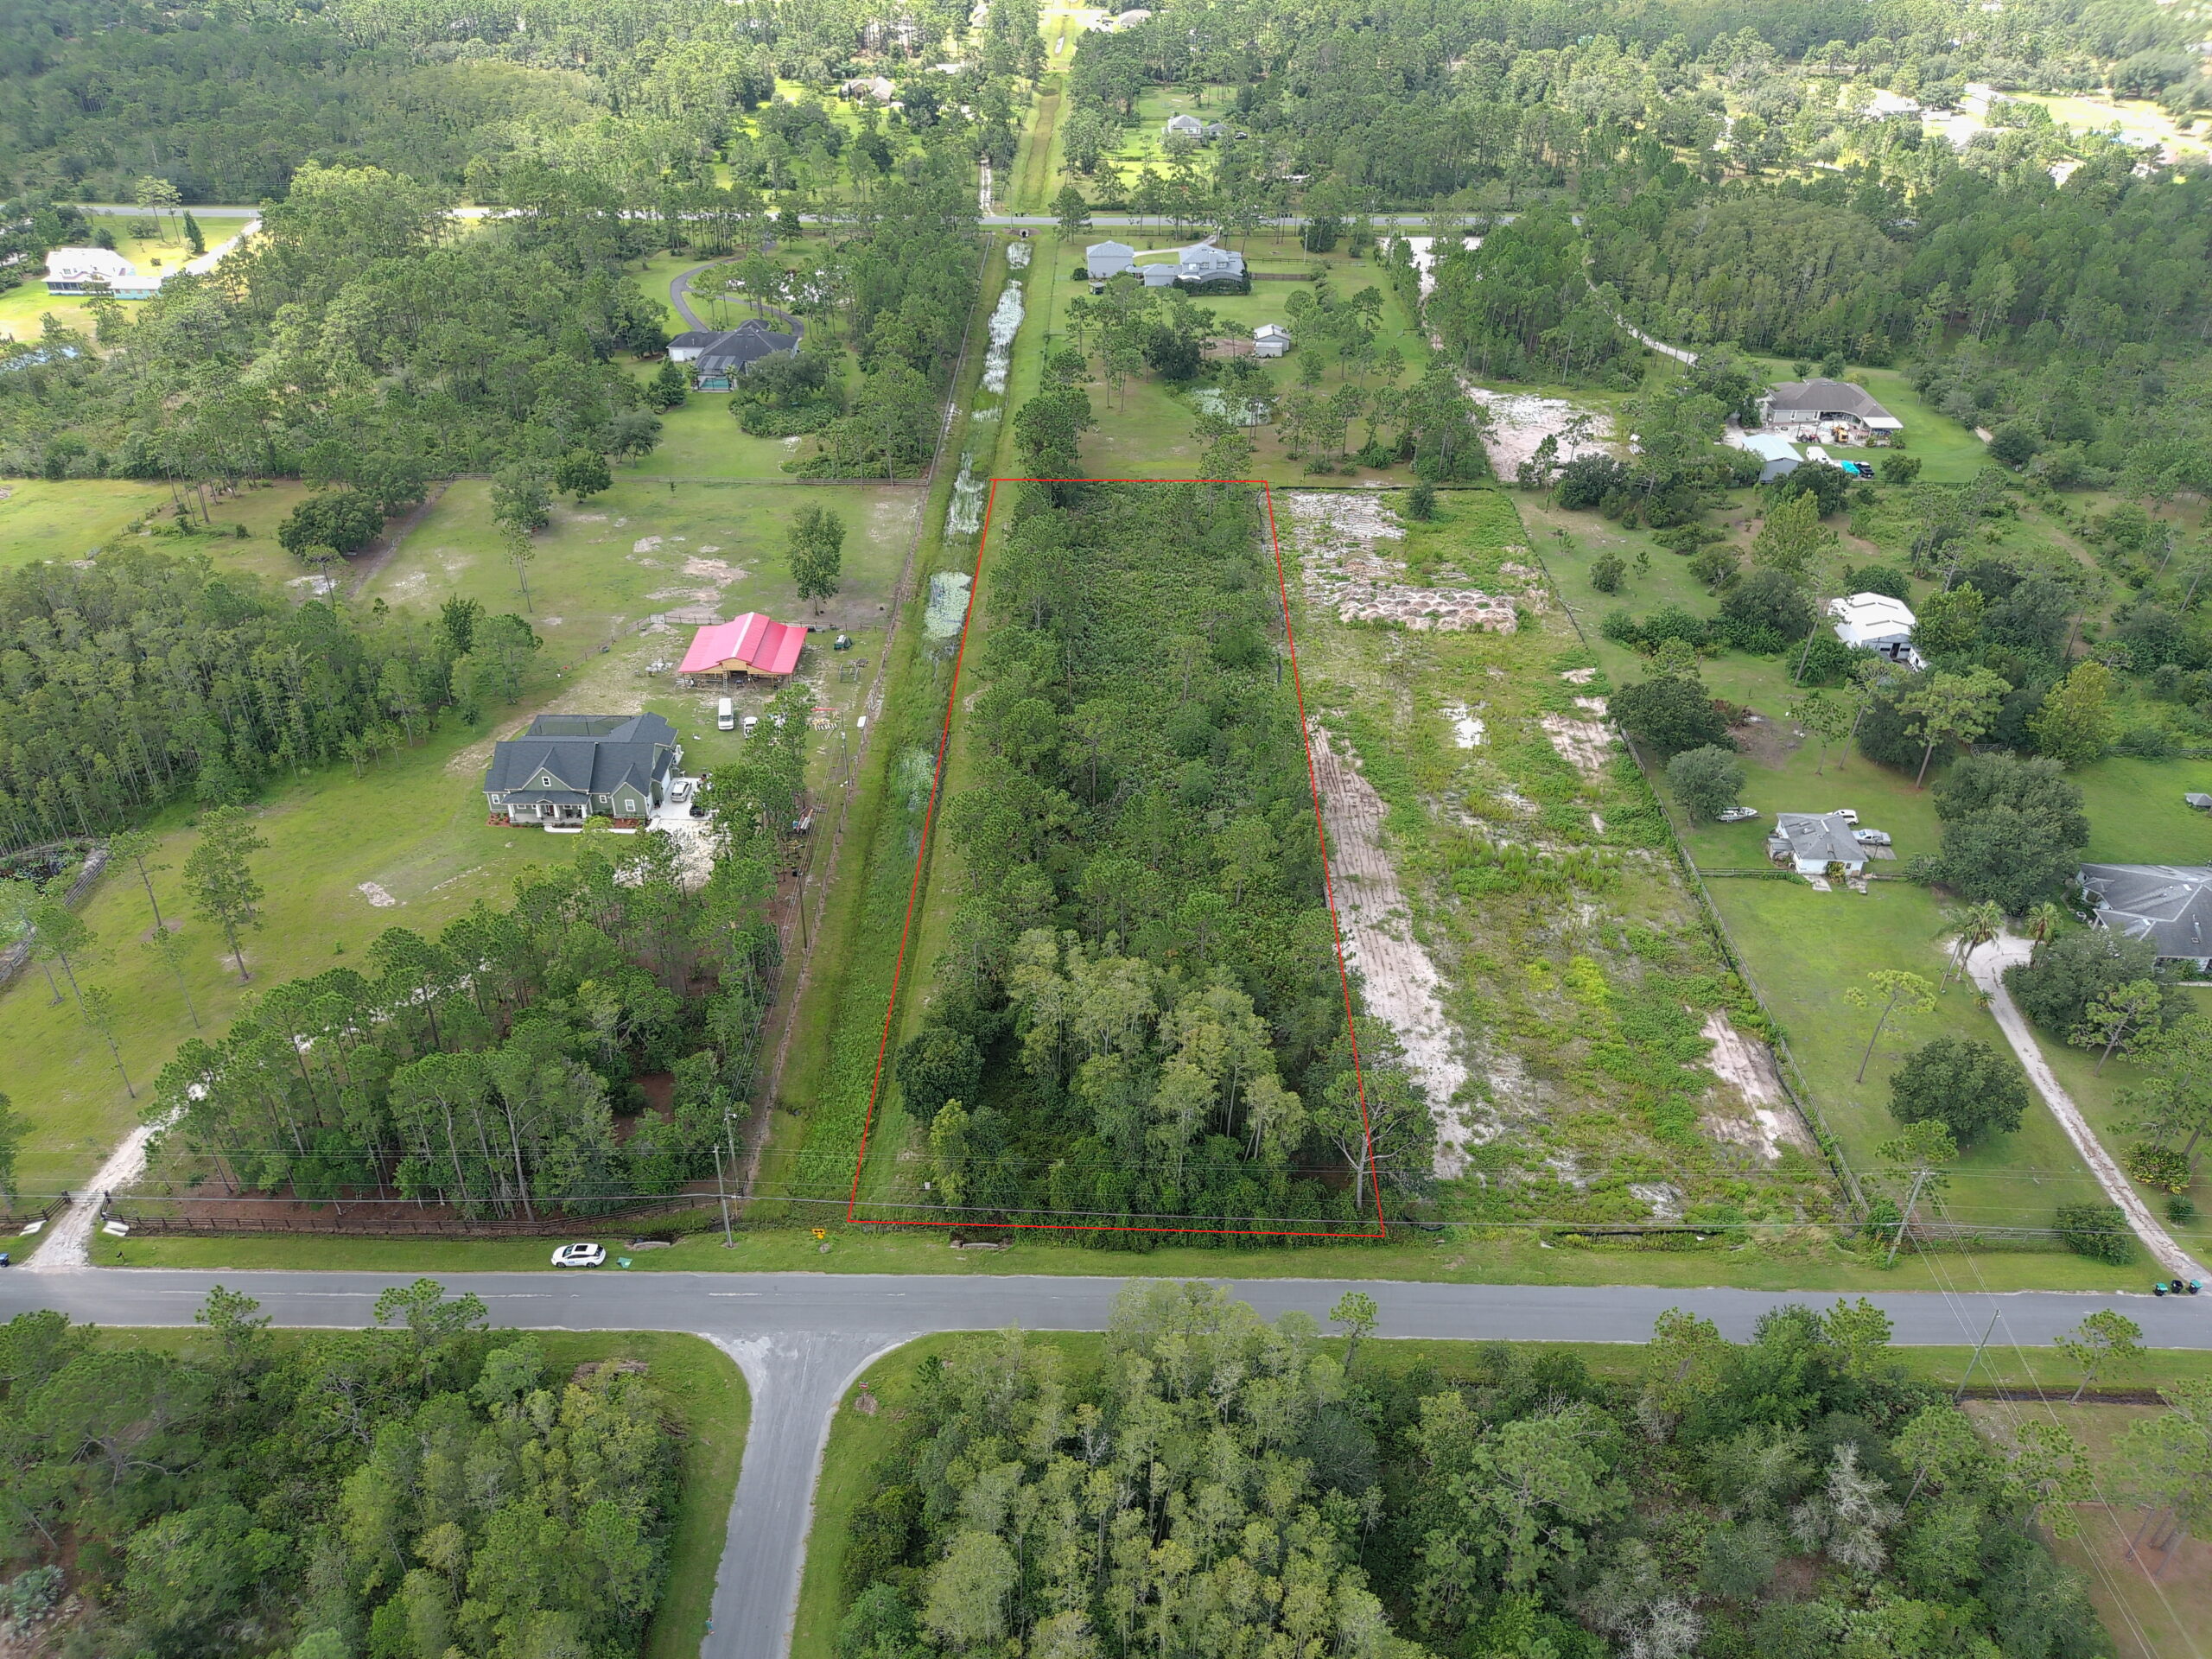 A top view of an acre lot